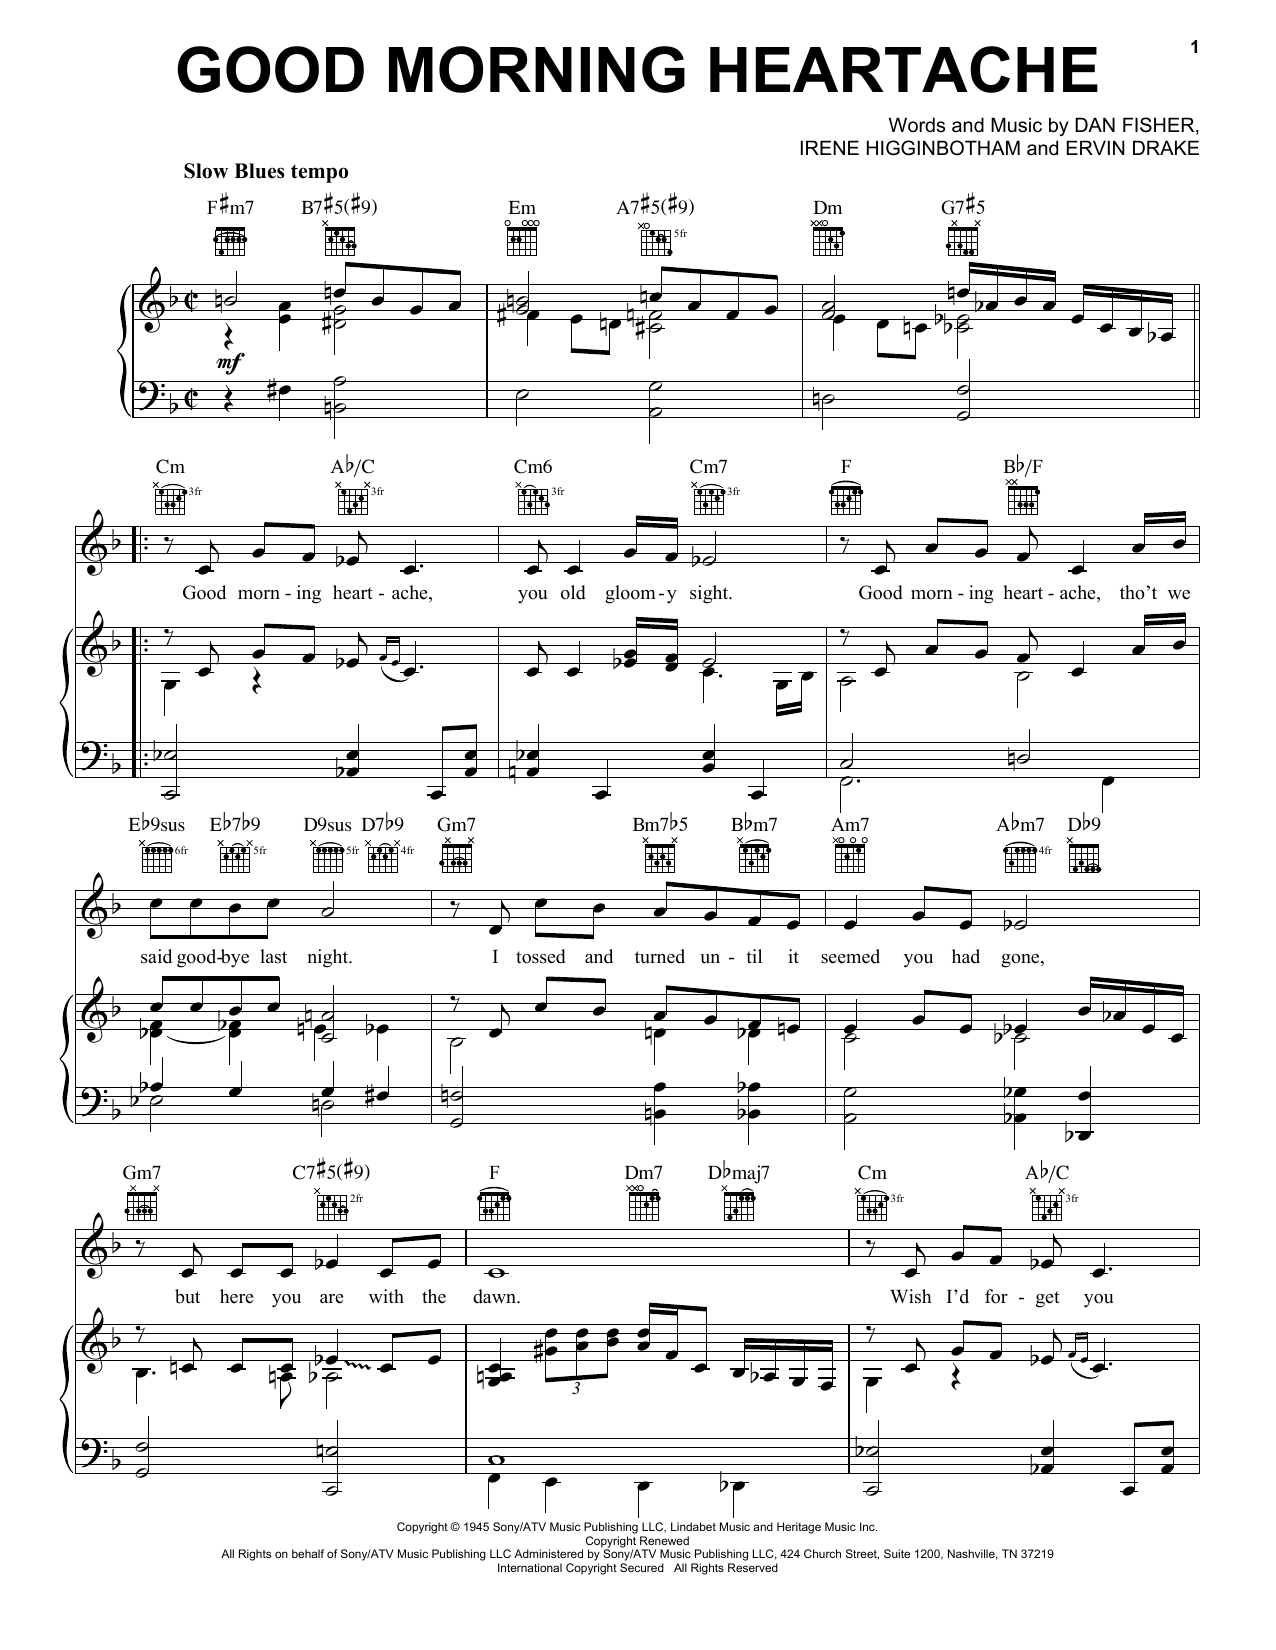 Download Billie Holiday Good Morning Heartache sheet music and printable PDF score & Folk music notes